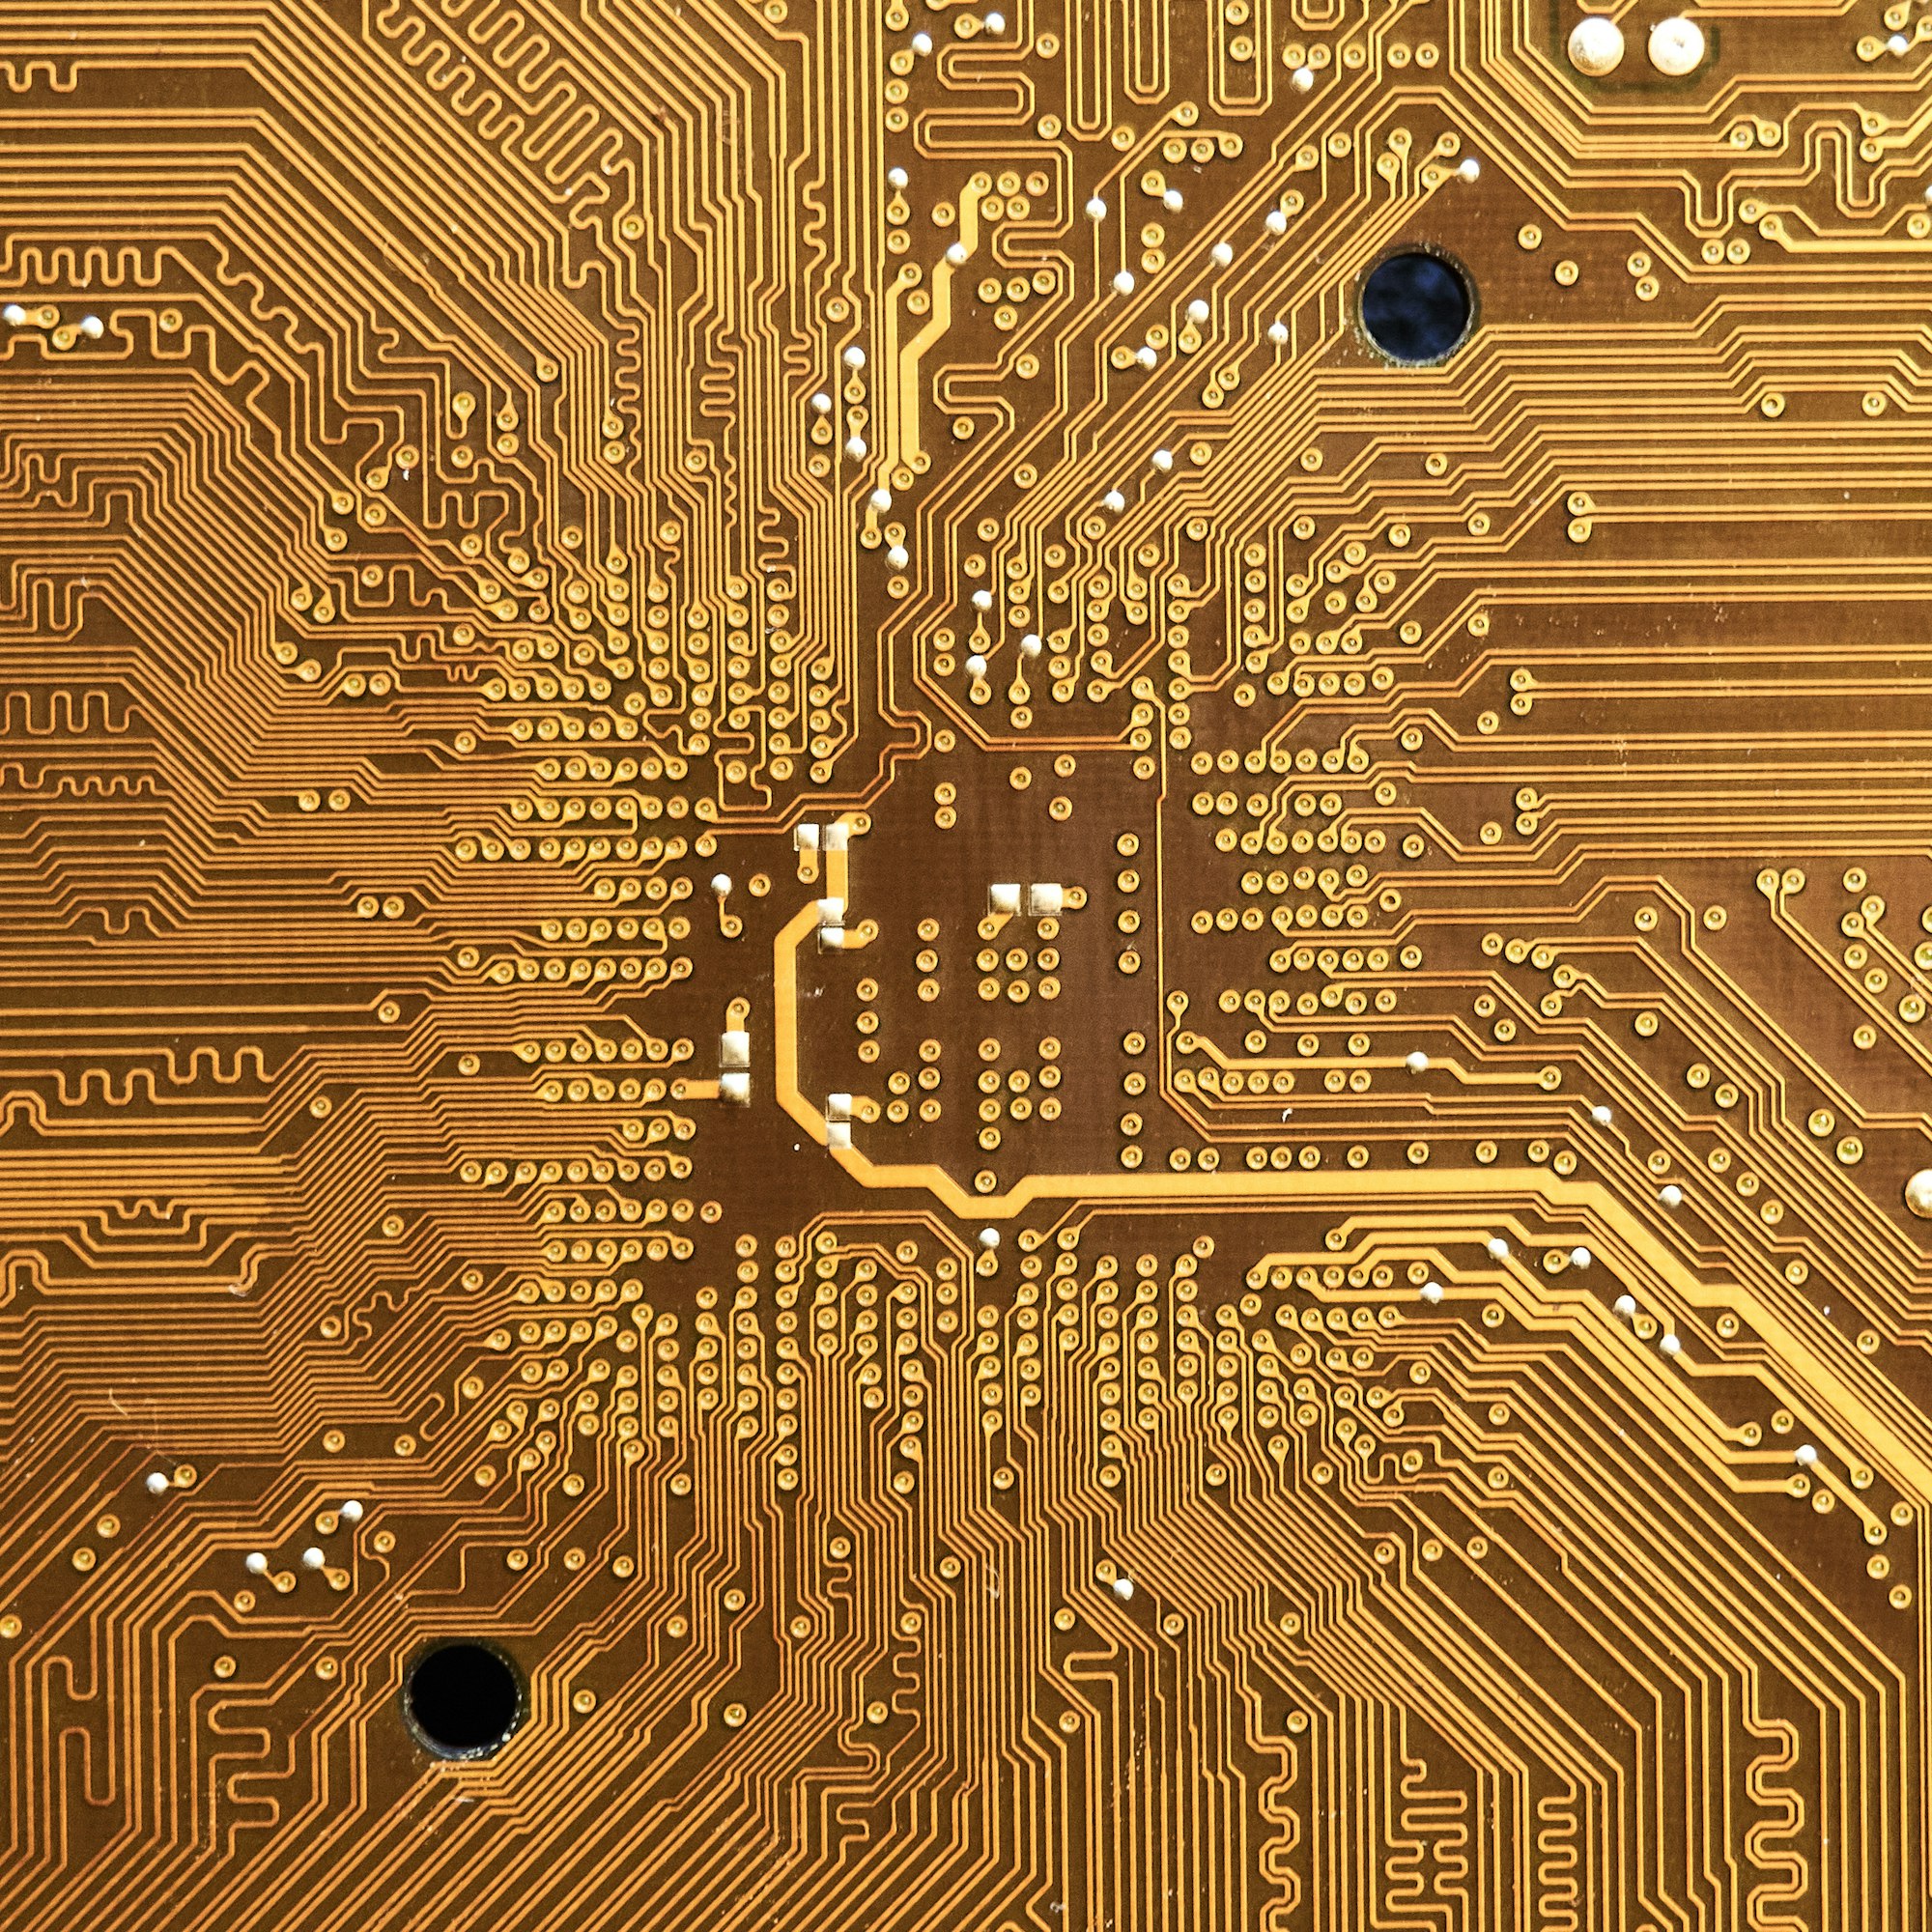 11 Awesome Facts About Quantum Computing